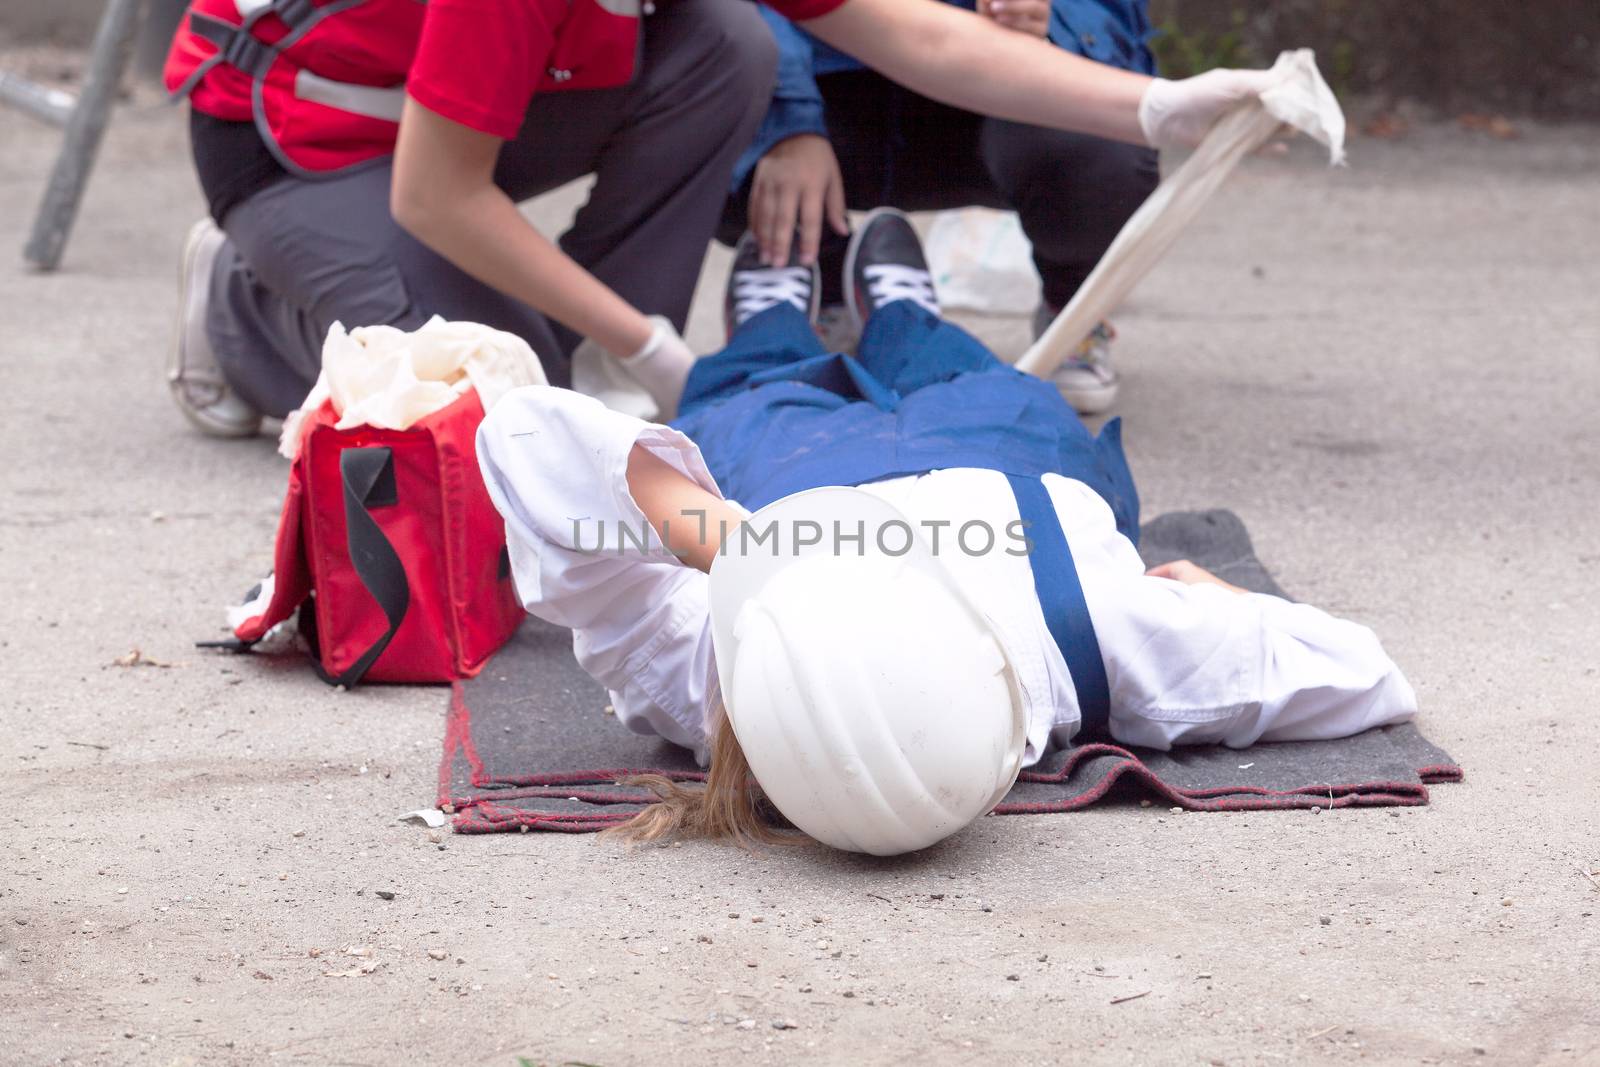 First aid after workplace accident by wellphoto